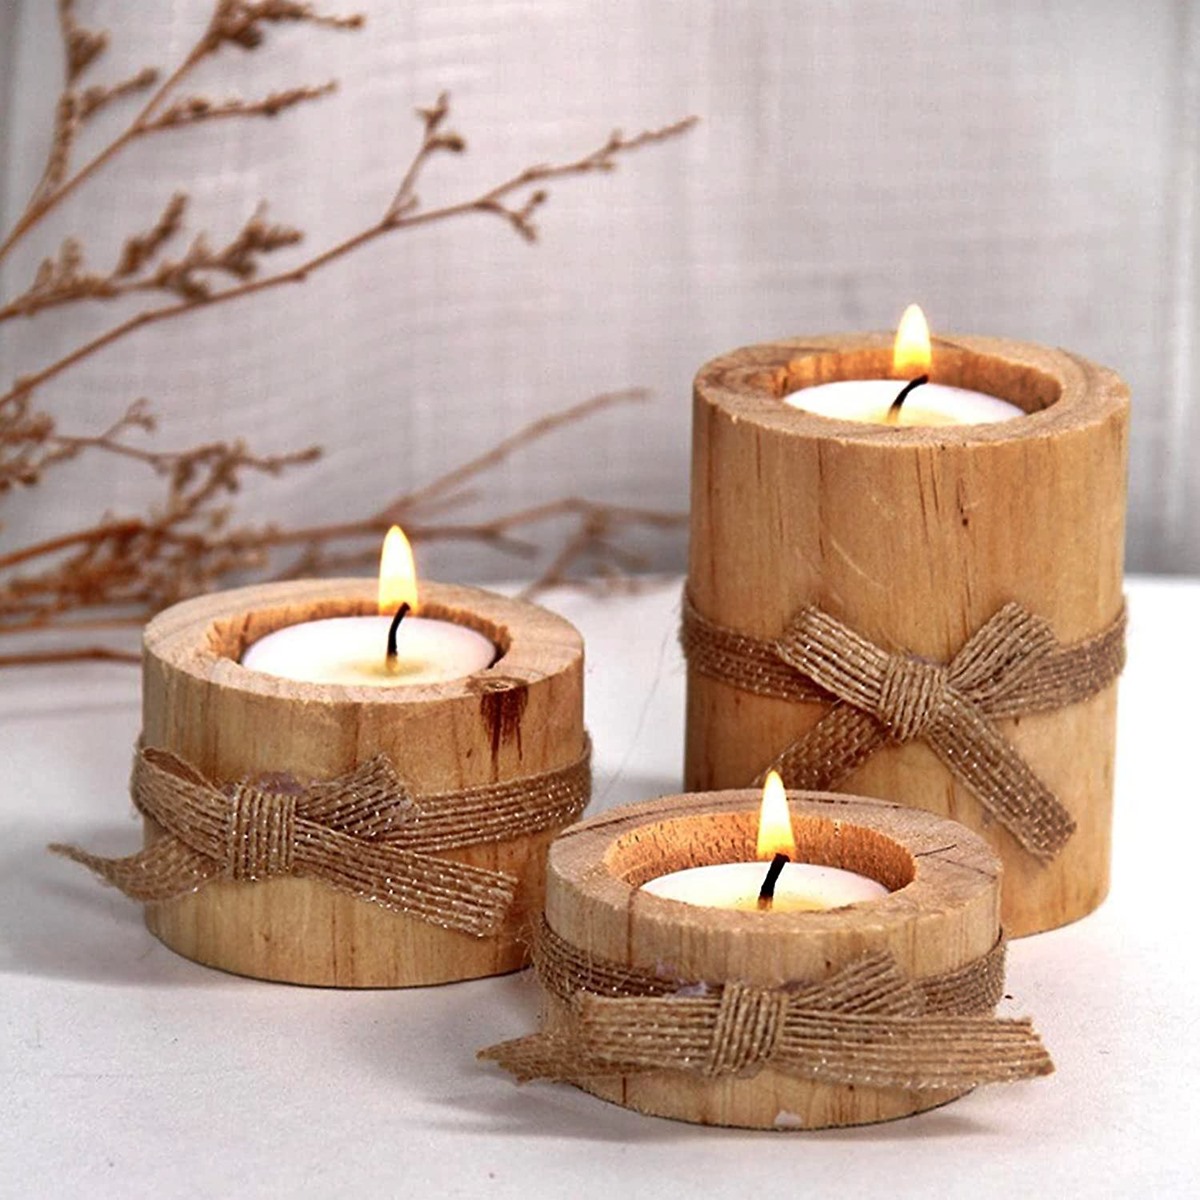 How To Make A Wooden Candle Holder